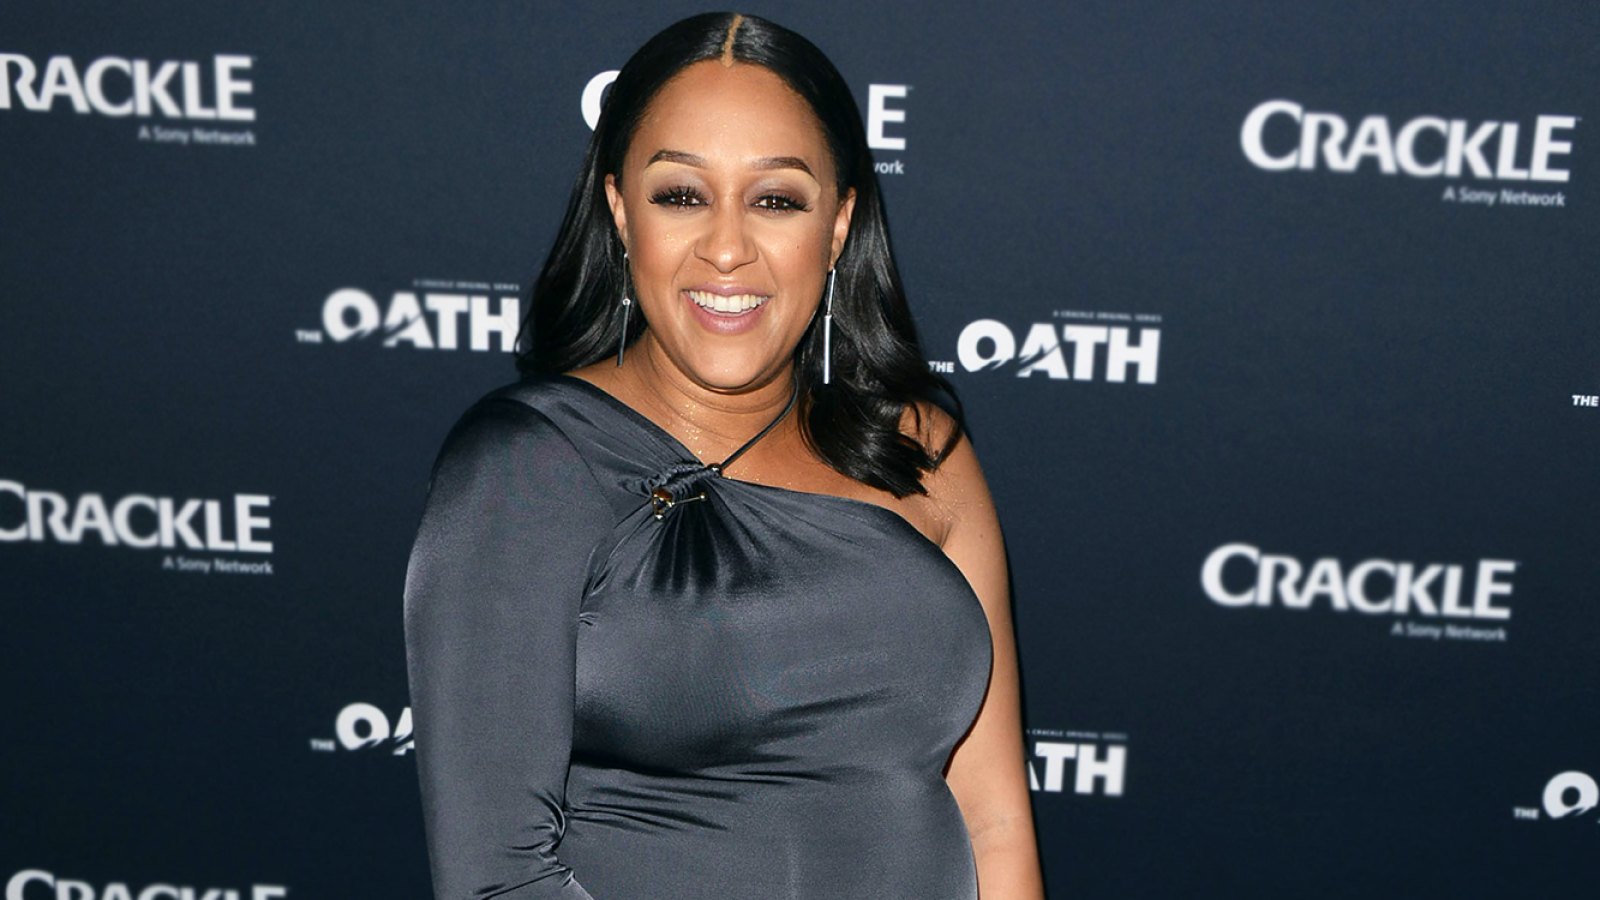 Tia Mowry at The Oath Premiere on March 07, 2018.